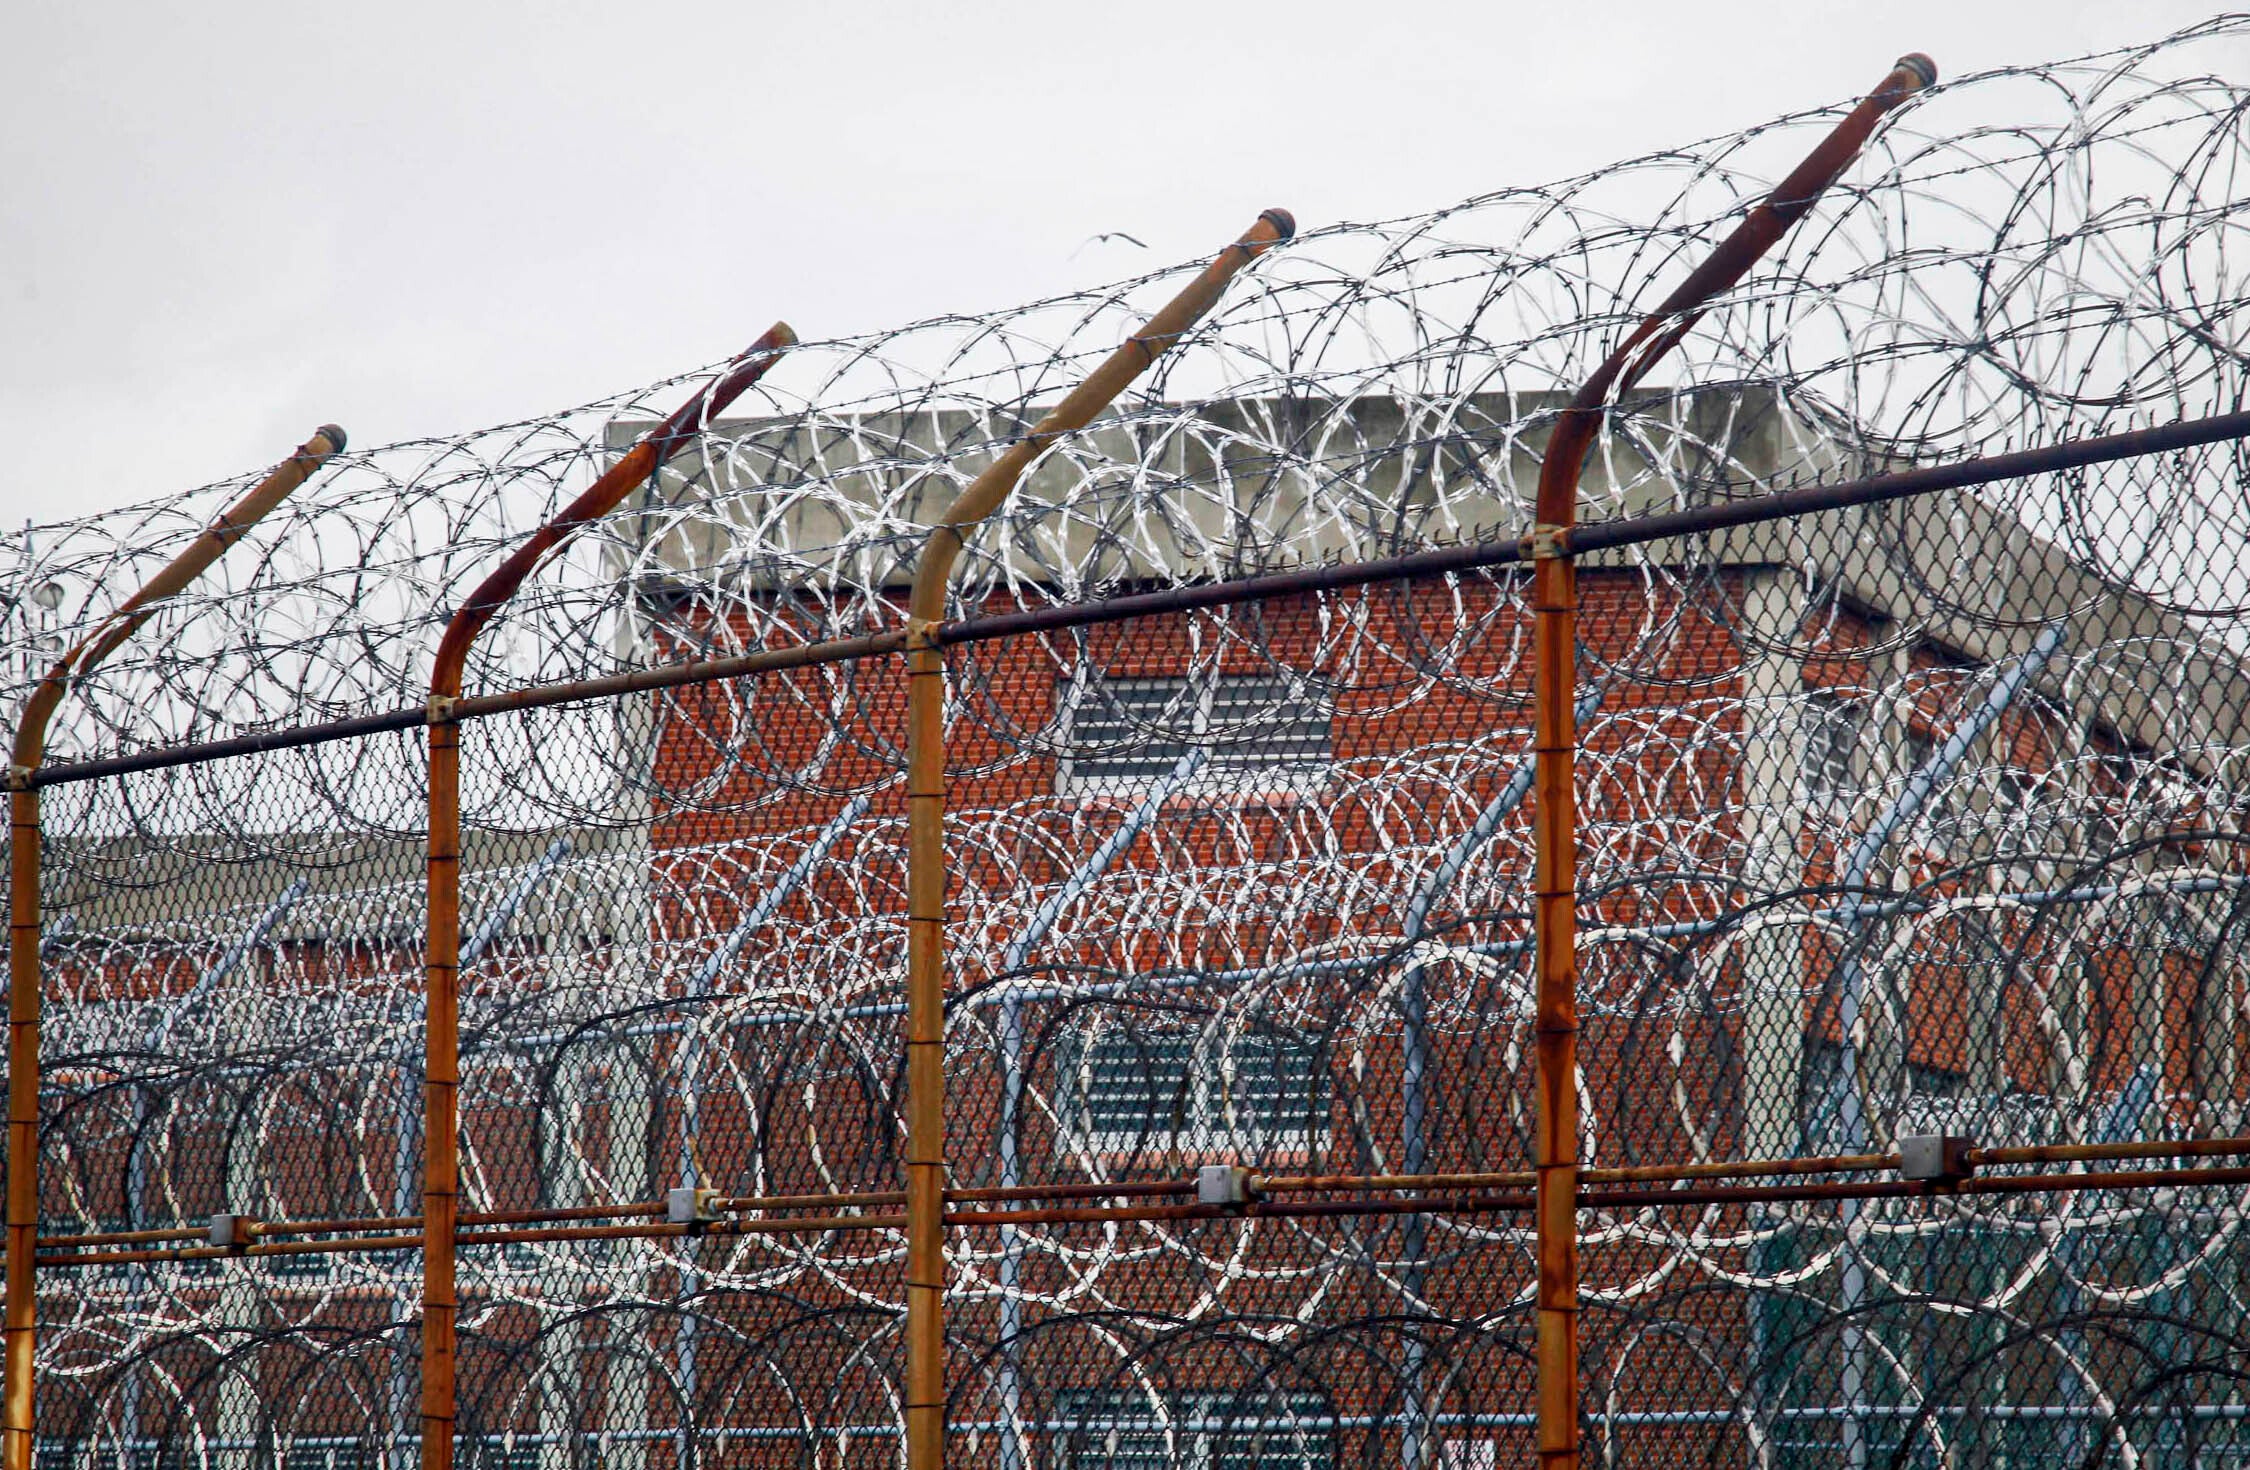 Four inmates at Rikers Island have died in 2022